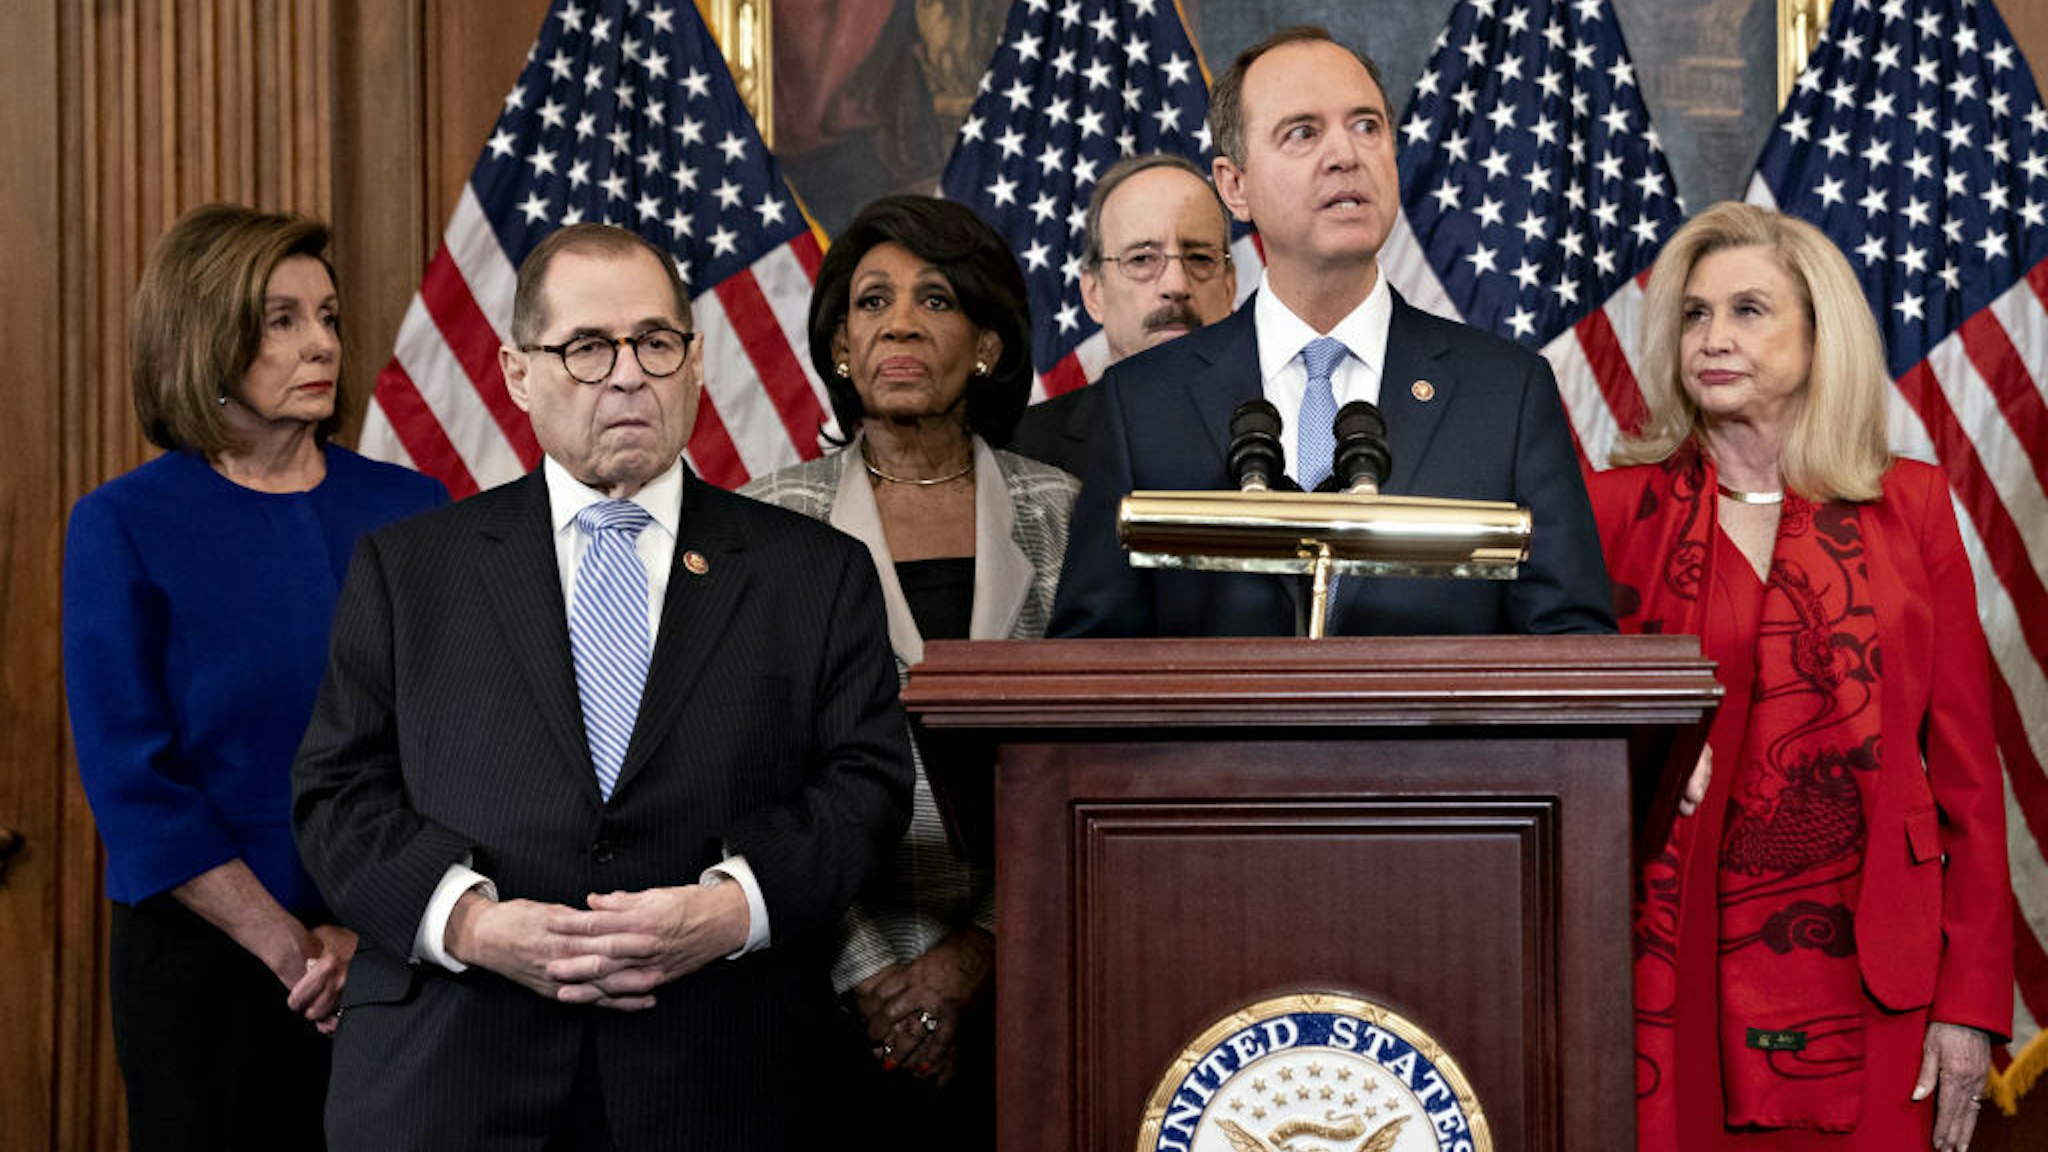 Representative Adam Schiff, a Democrat from California and chairman of the House Intelligence Committee, second right, speaks as U.S. House Speaker Nancy Pelosi, a Democrat from California, from left, Representative Jerry Nadler, a Democrat from New York and chairman of the House Judiciary Committee, Representative Maxine Waters, a Democrat from California and chairwoman of the House Financial Services Committee, Representative Eliot Engel, a Democrat from New York and chairman of the House Foreign Affairs Committee, and Representative Carolyn Maloney, a Democrat from New York and chairwoman of the House Oversight Committee, listen during a news conference announcing the next steps in the impeachment inquiry at the U.S. Capitol in Washington, D.C., U.S., on Tuesday, Dec. 10, 2019. House Democrats unveiled two articles of impeachment against President Donald Trump, one on abuse of power and the other involving obstruction of Congress. Photographer: Andrew Harrer/Bloomberg